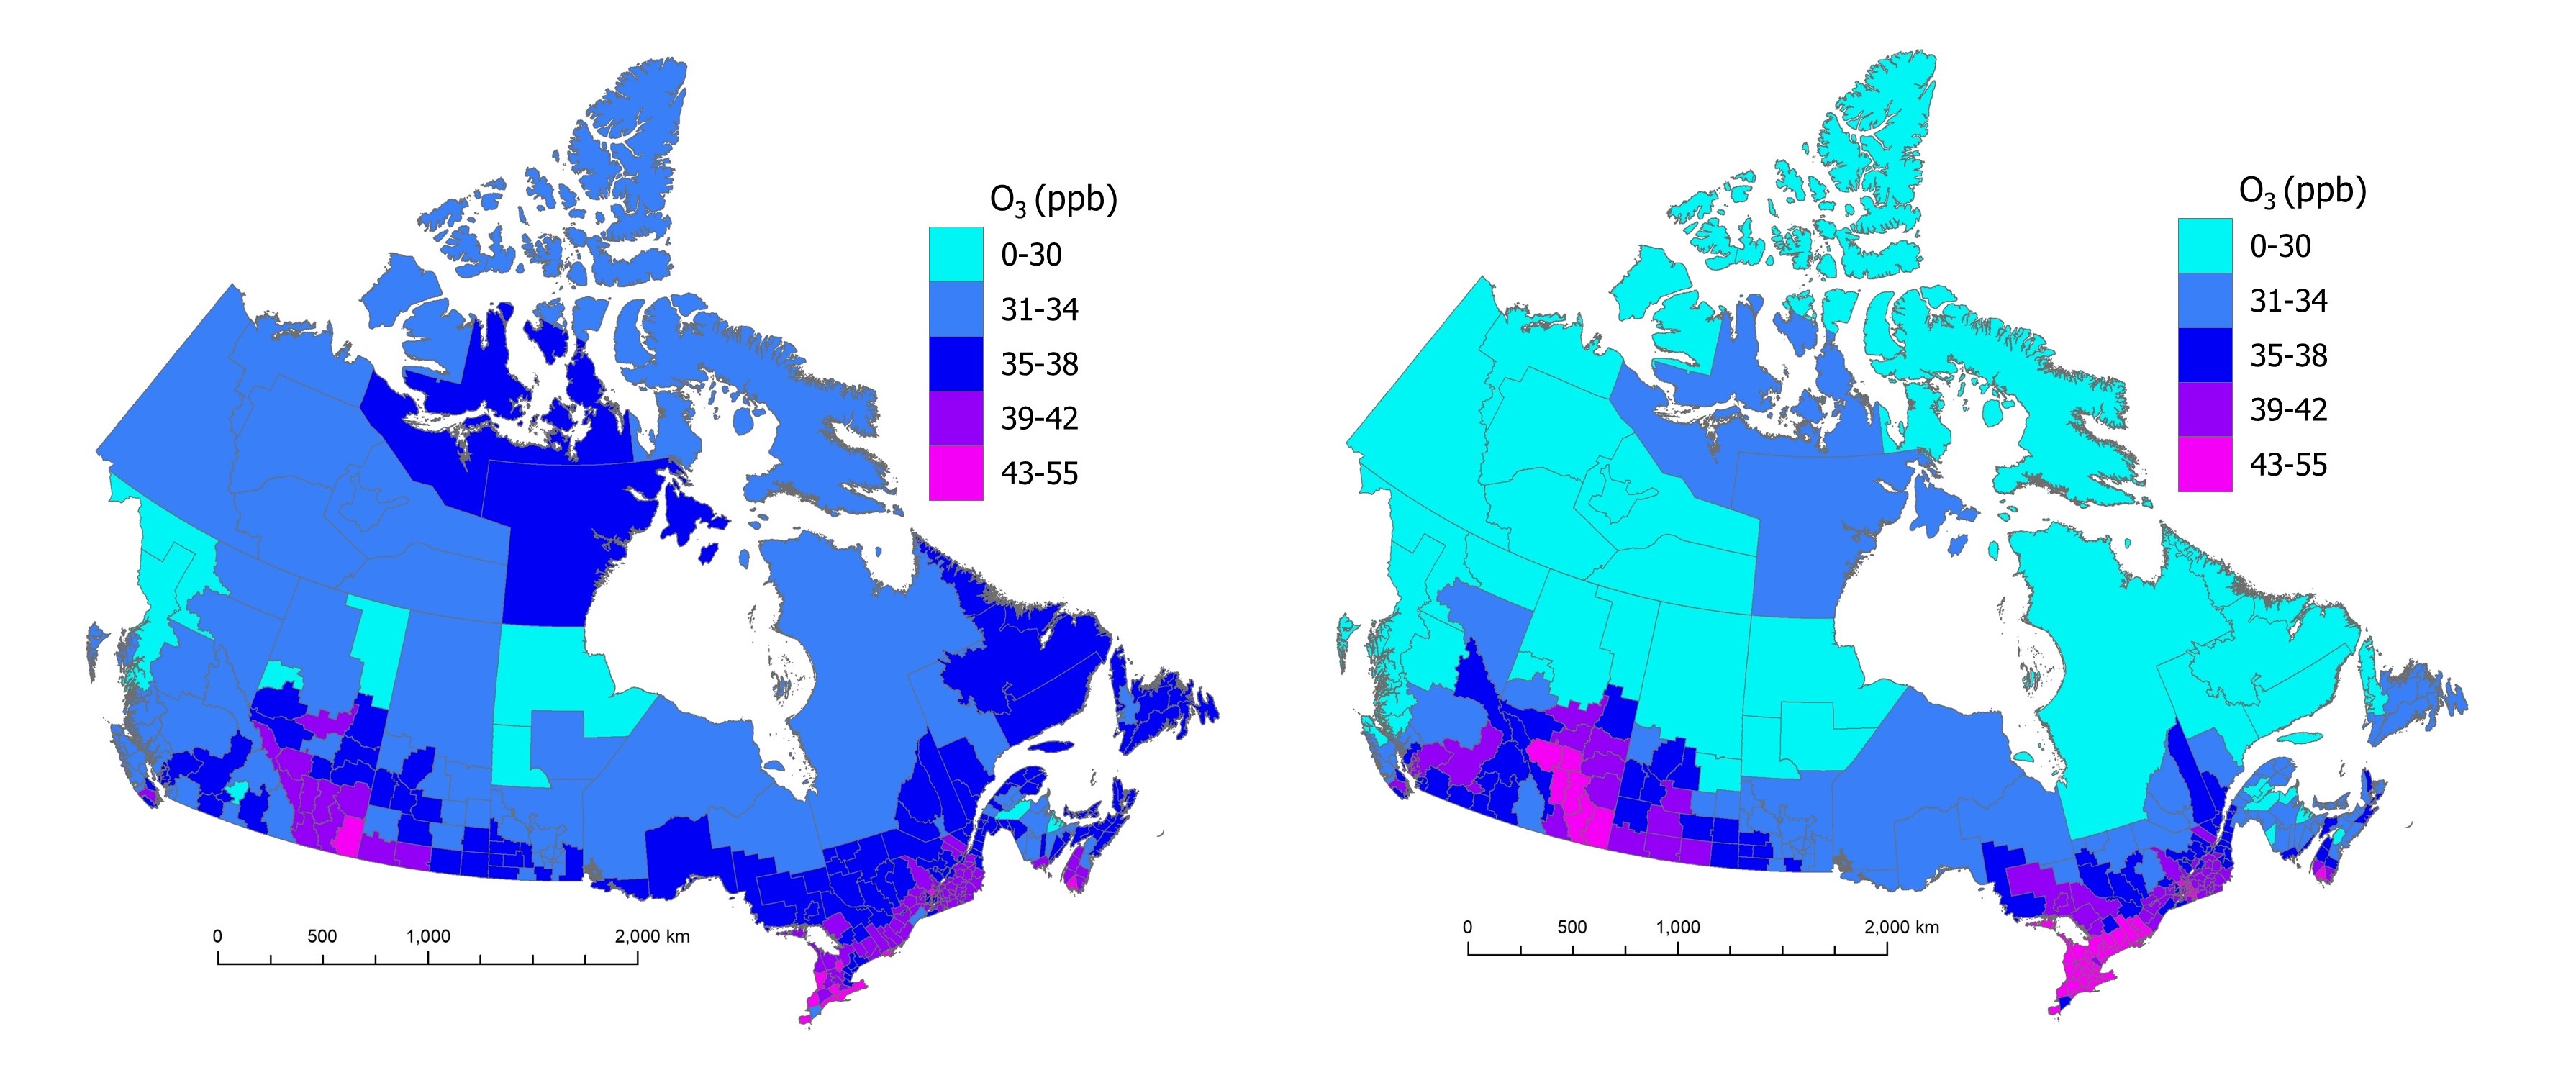 Two maps of Canada, one showing estimated annual and one showing summer average daily maximum O3 concentrations across census divisions. 